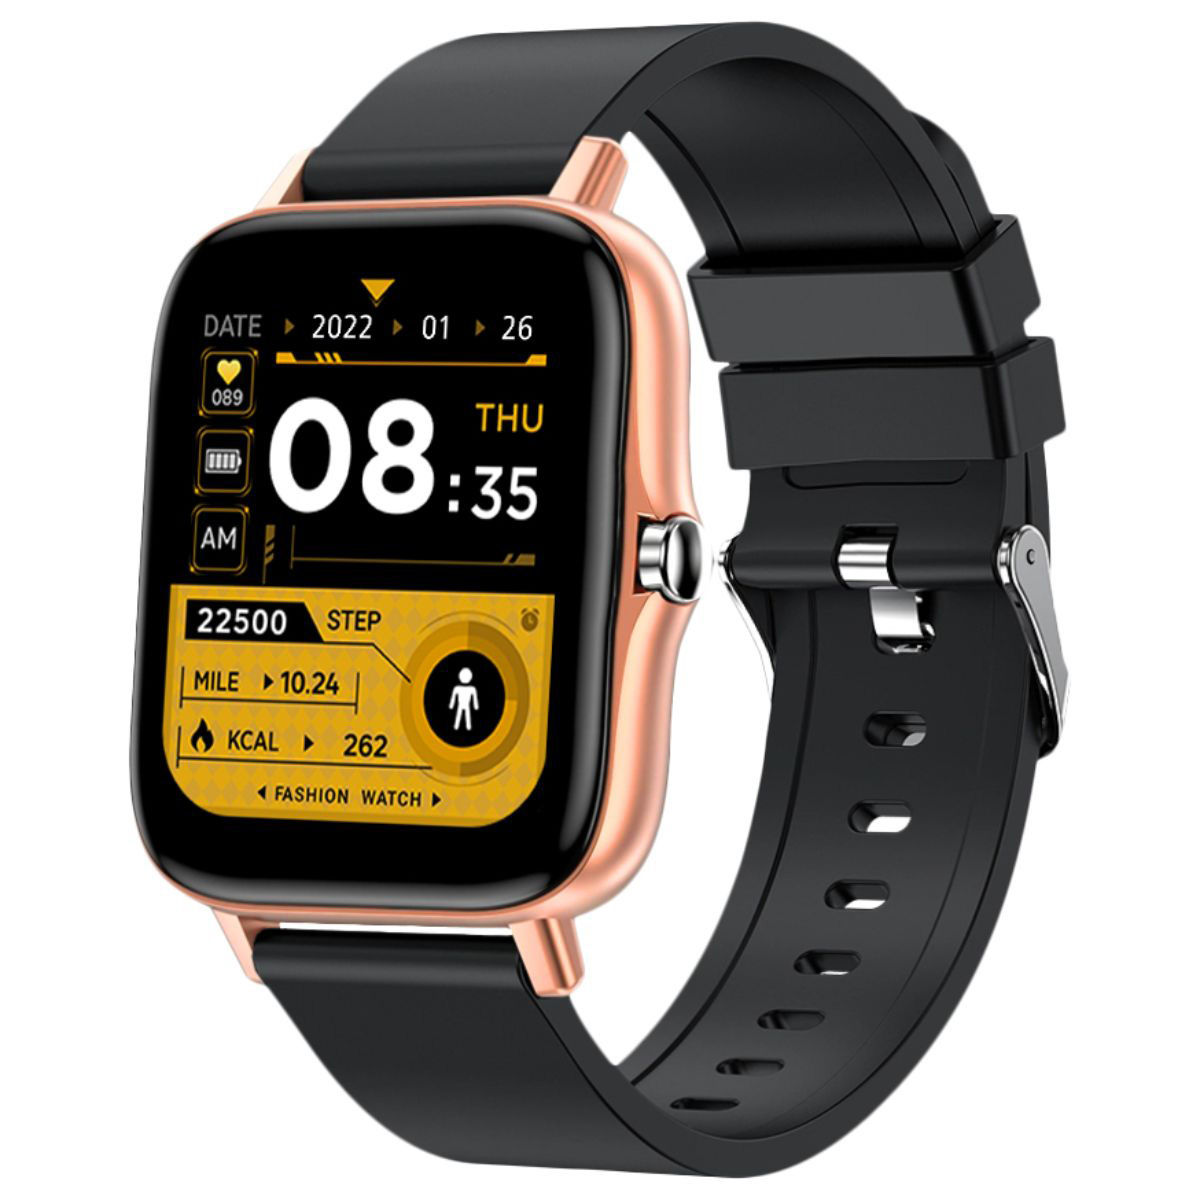 Giordano Unisex Smart Watch With Bluetooth Voice Calling, With In-Built Microphone And Speaker